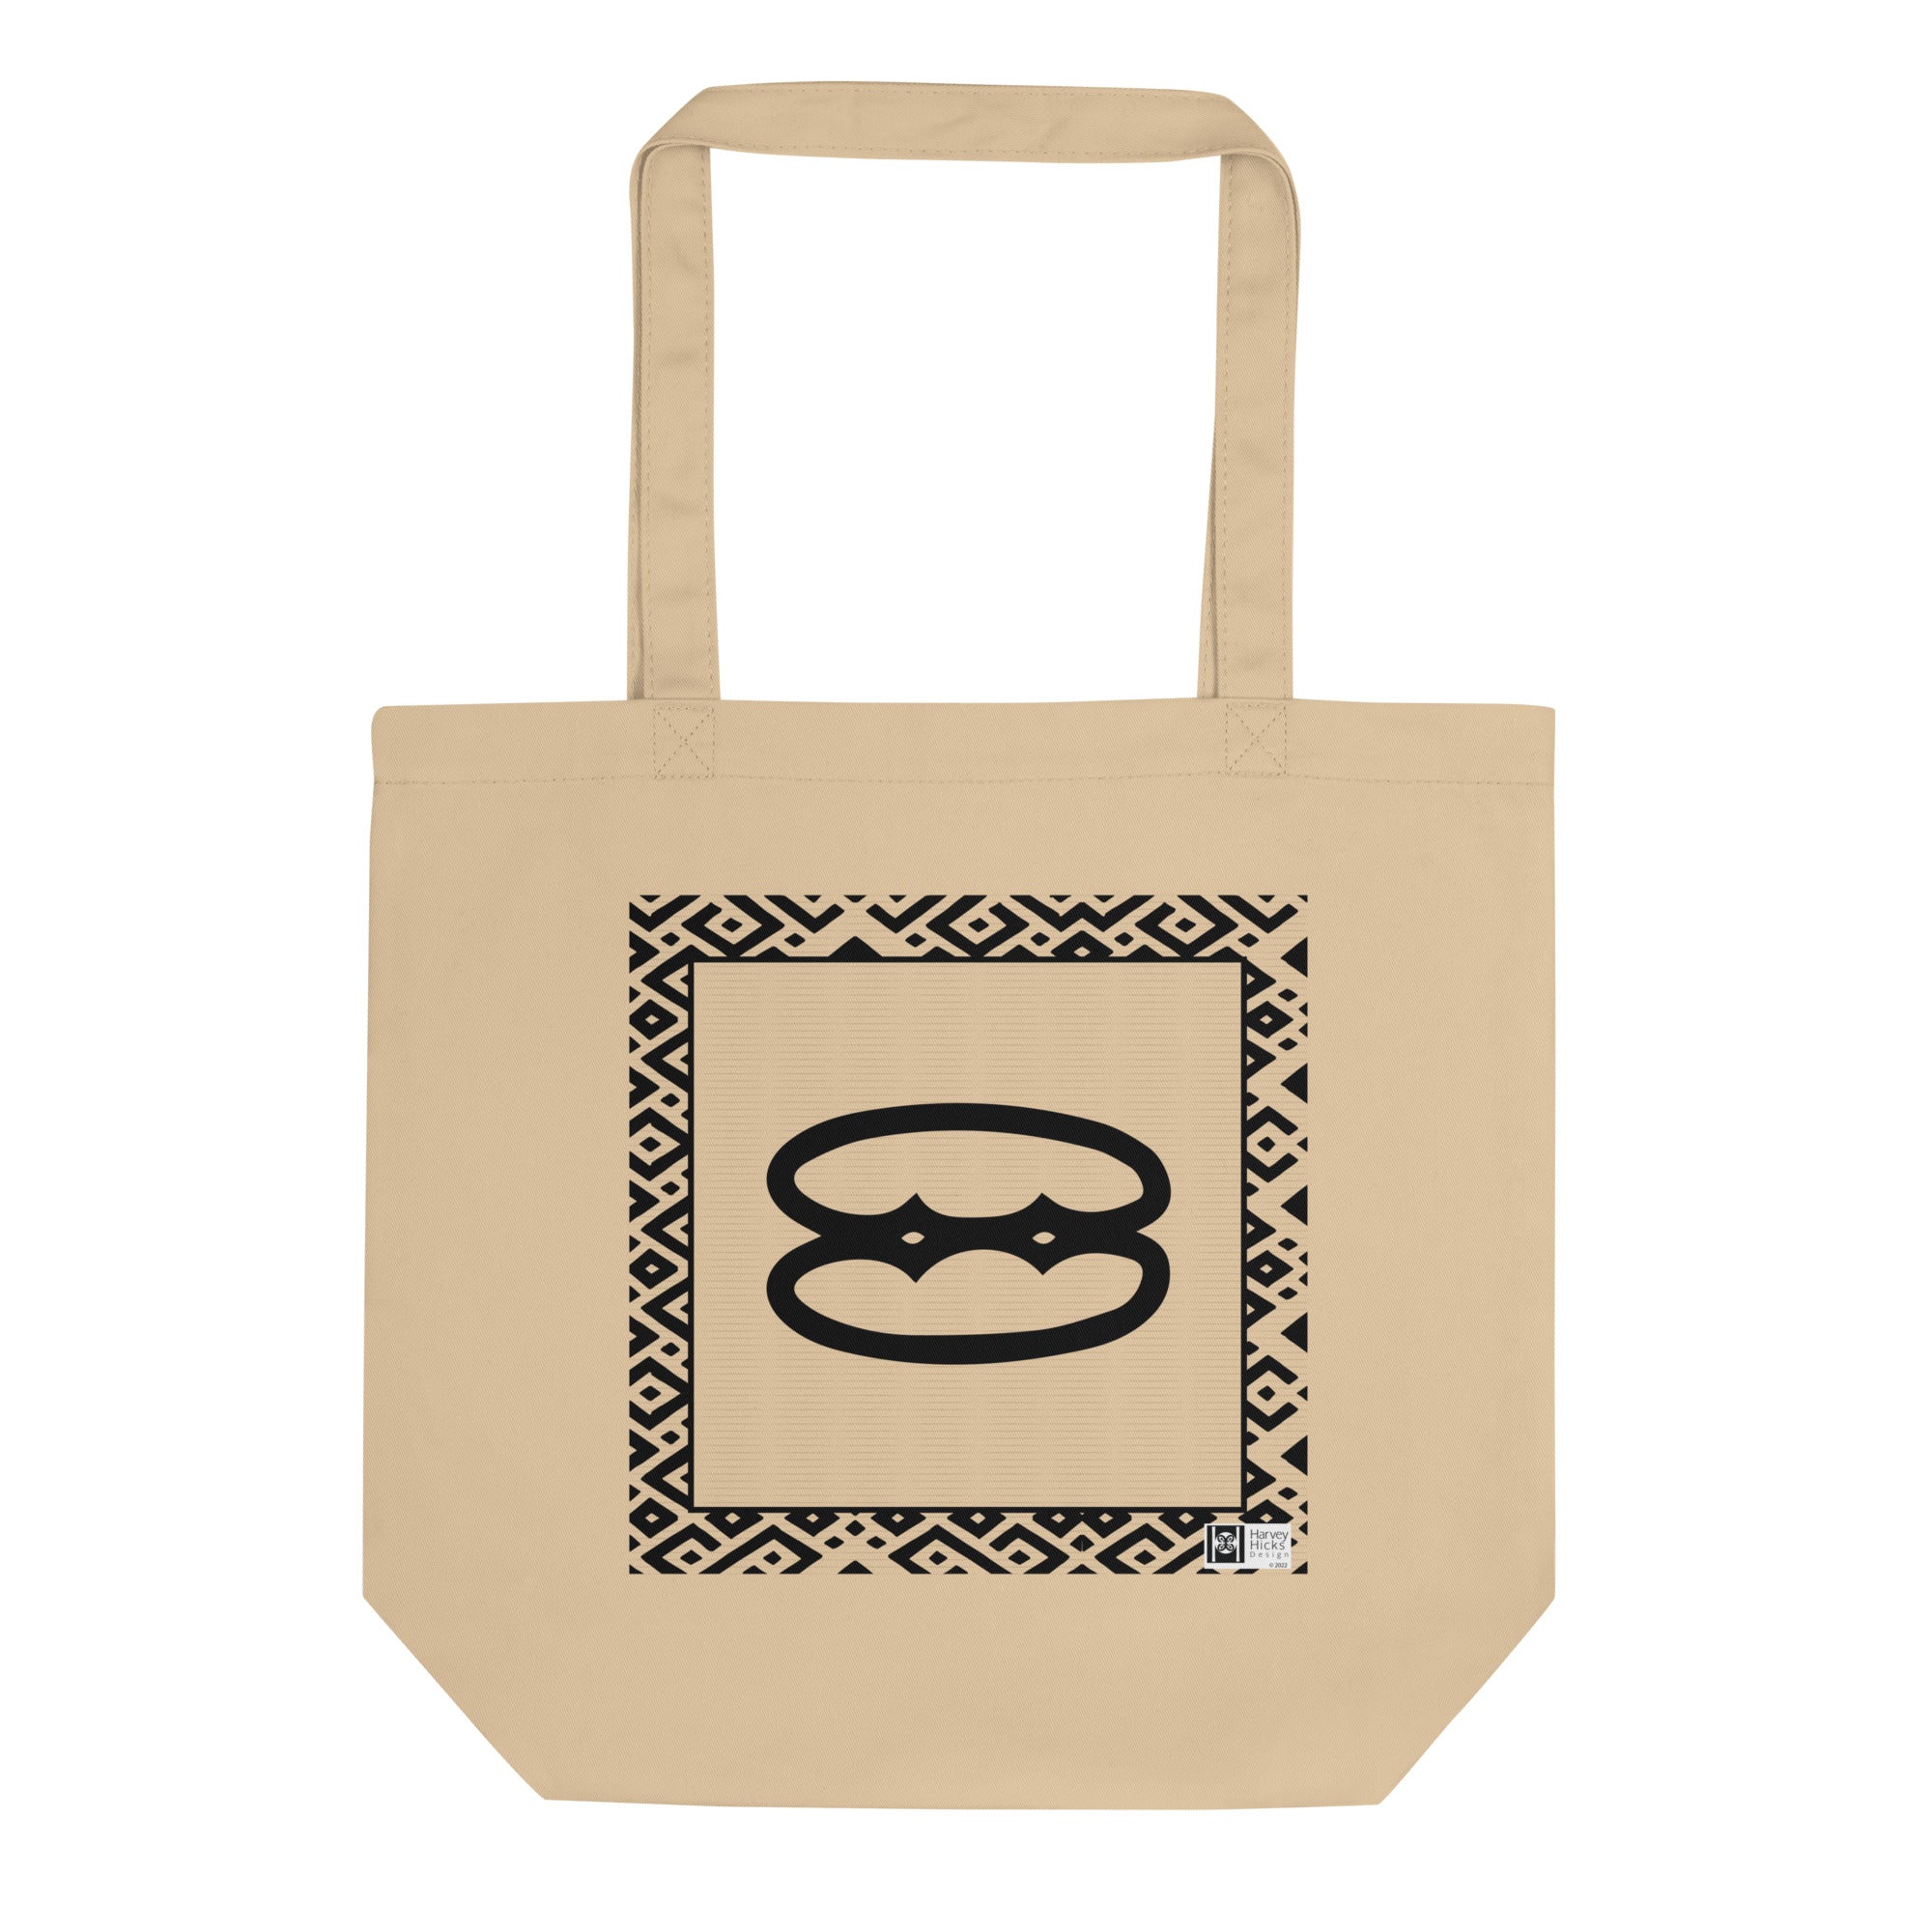 100% cotton Eco Tote Bag, featuring the Adinkra symbol for peace, NO TEXT